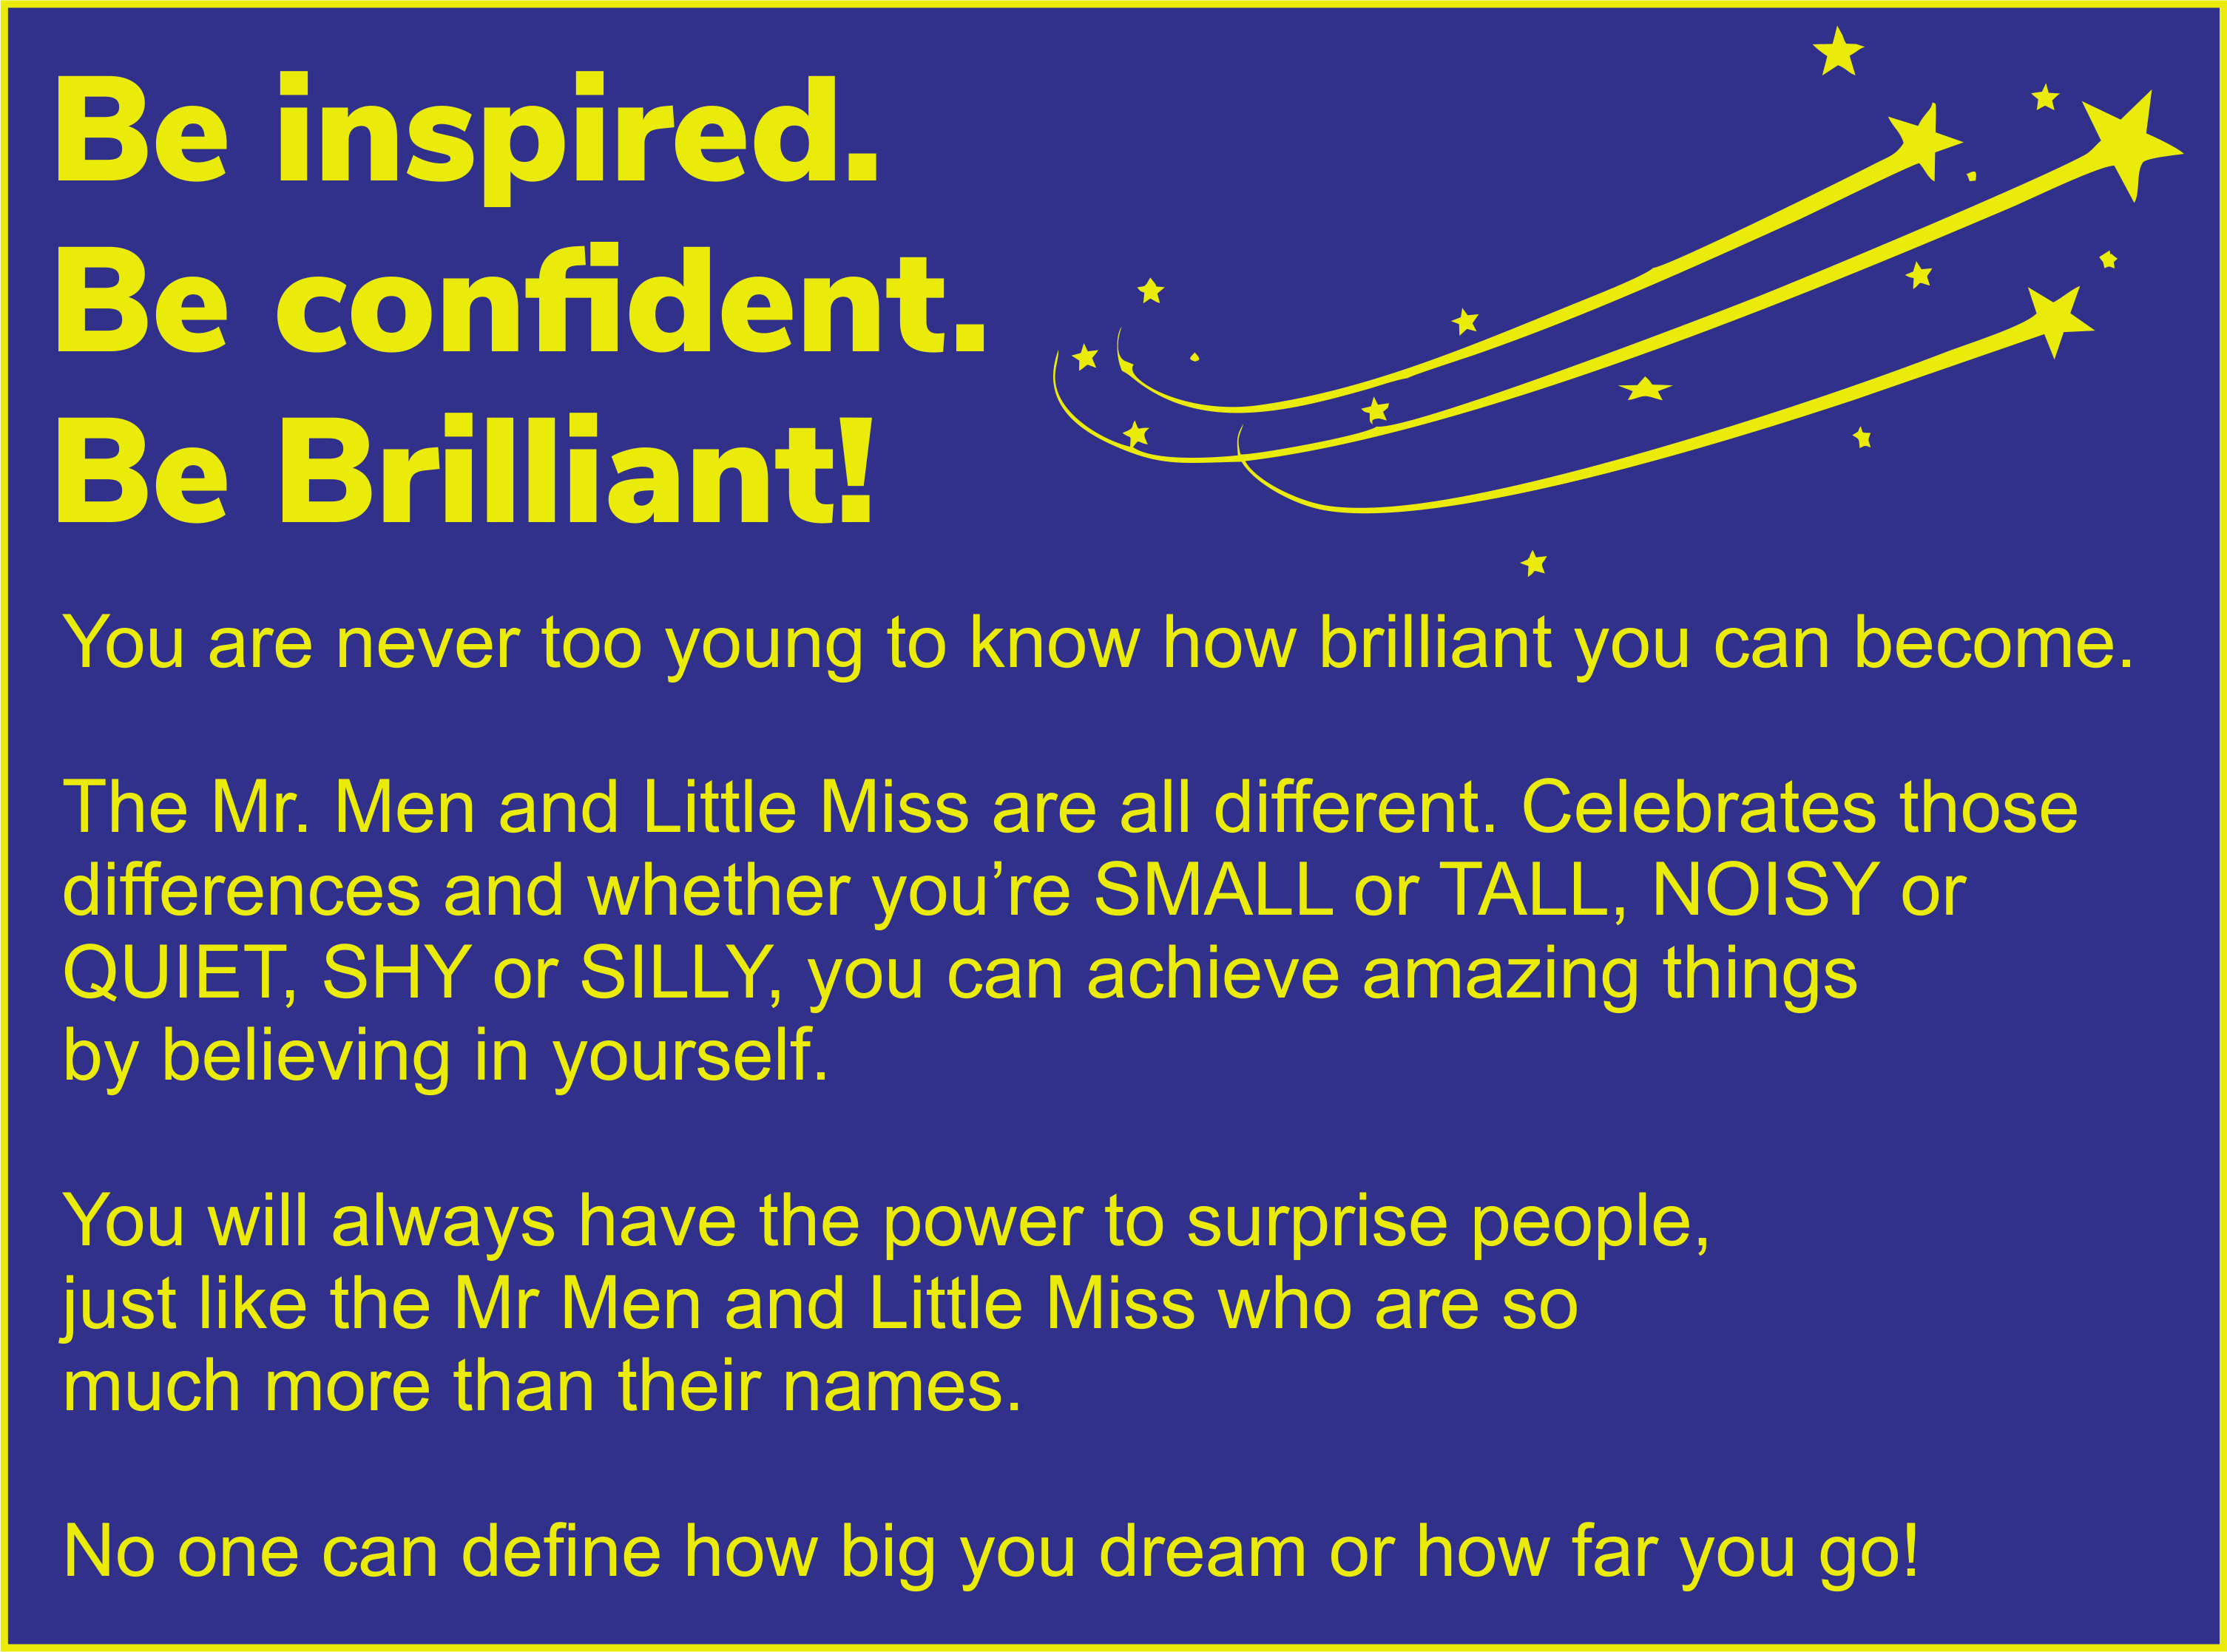 Be inspired. Be confident. Be Brilliant!